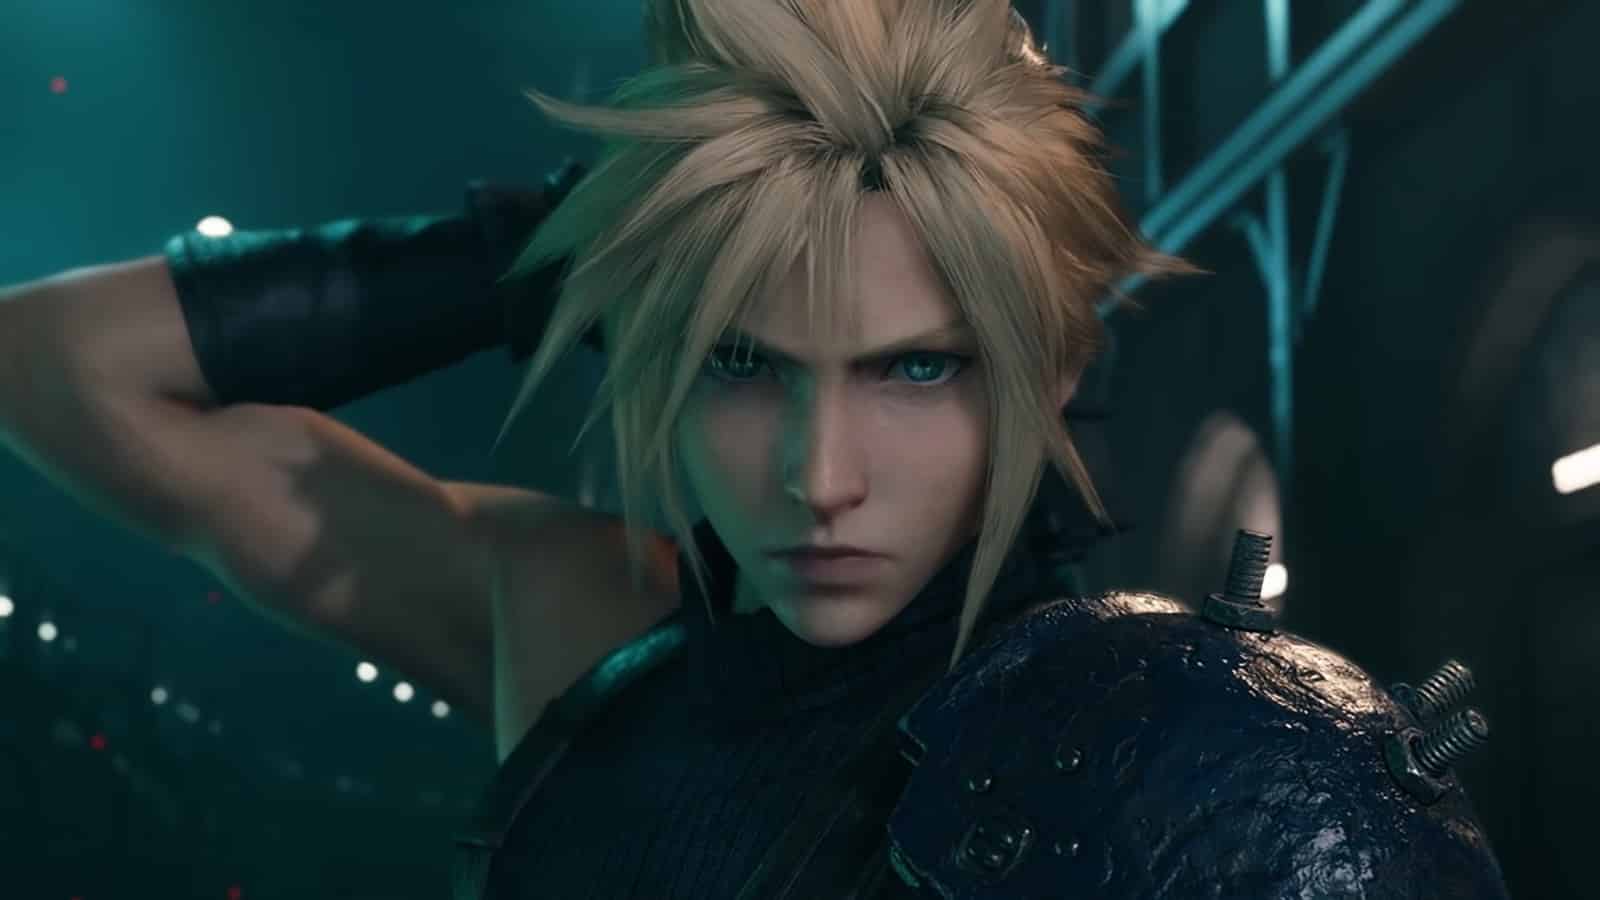 Final Fantasy 7: Ever Crisis Steam Page Goes Live 'Coming Soon